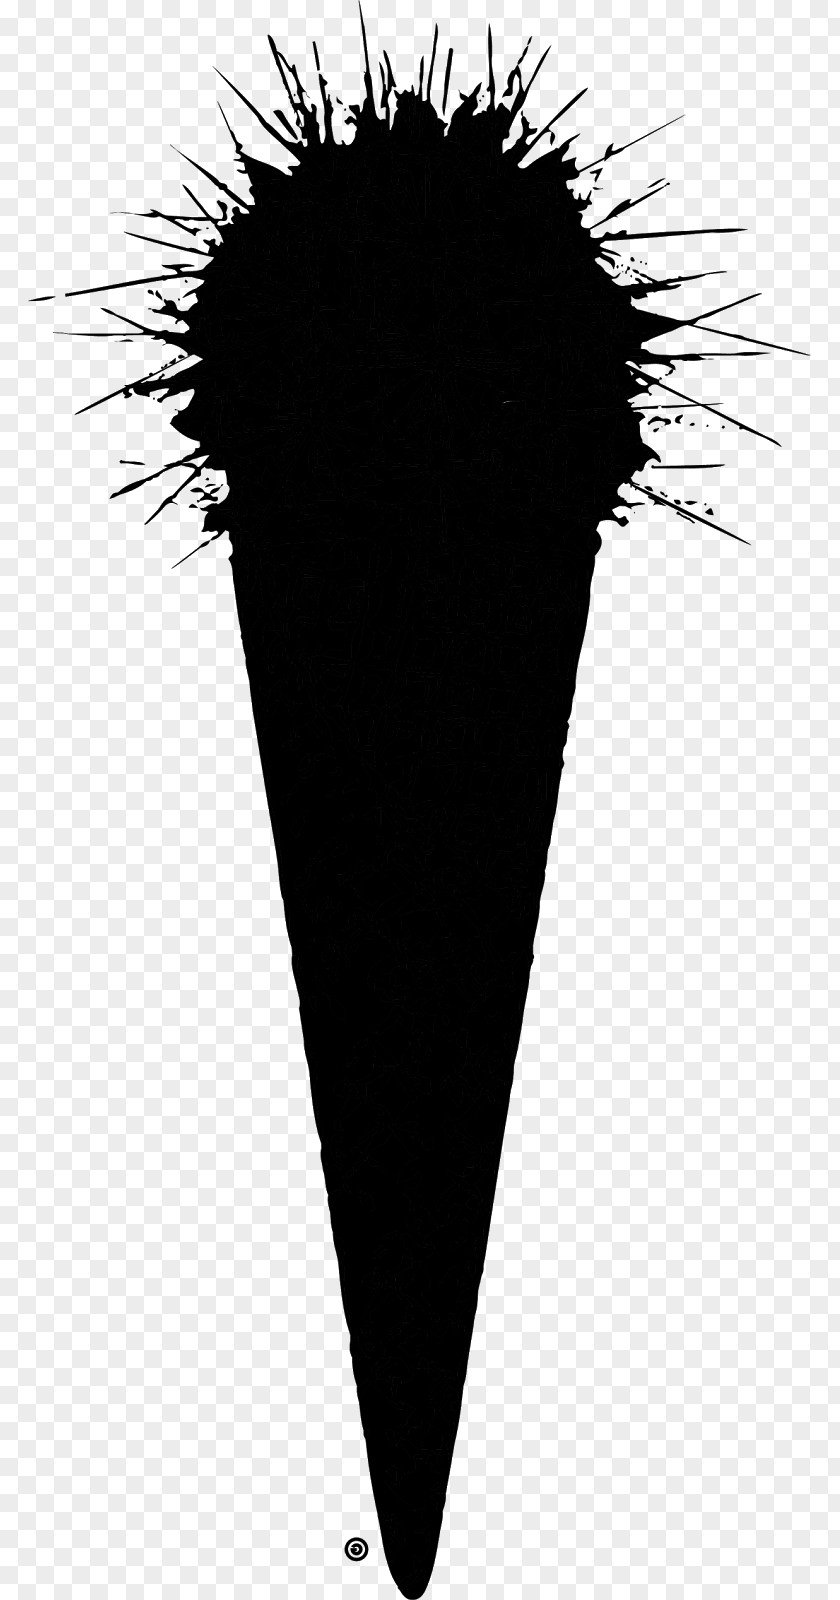 Brush Silhouette PNG